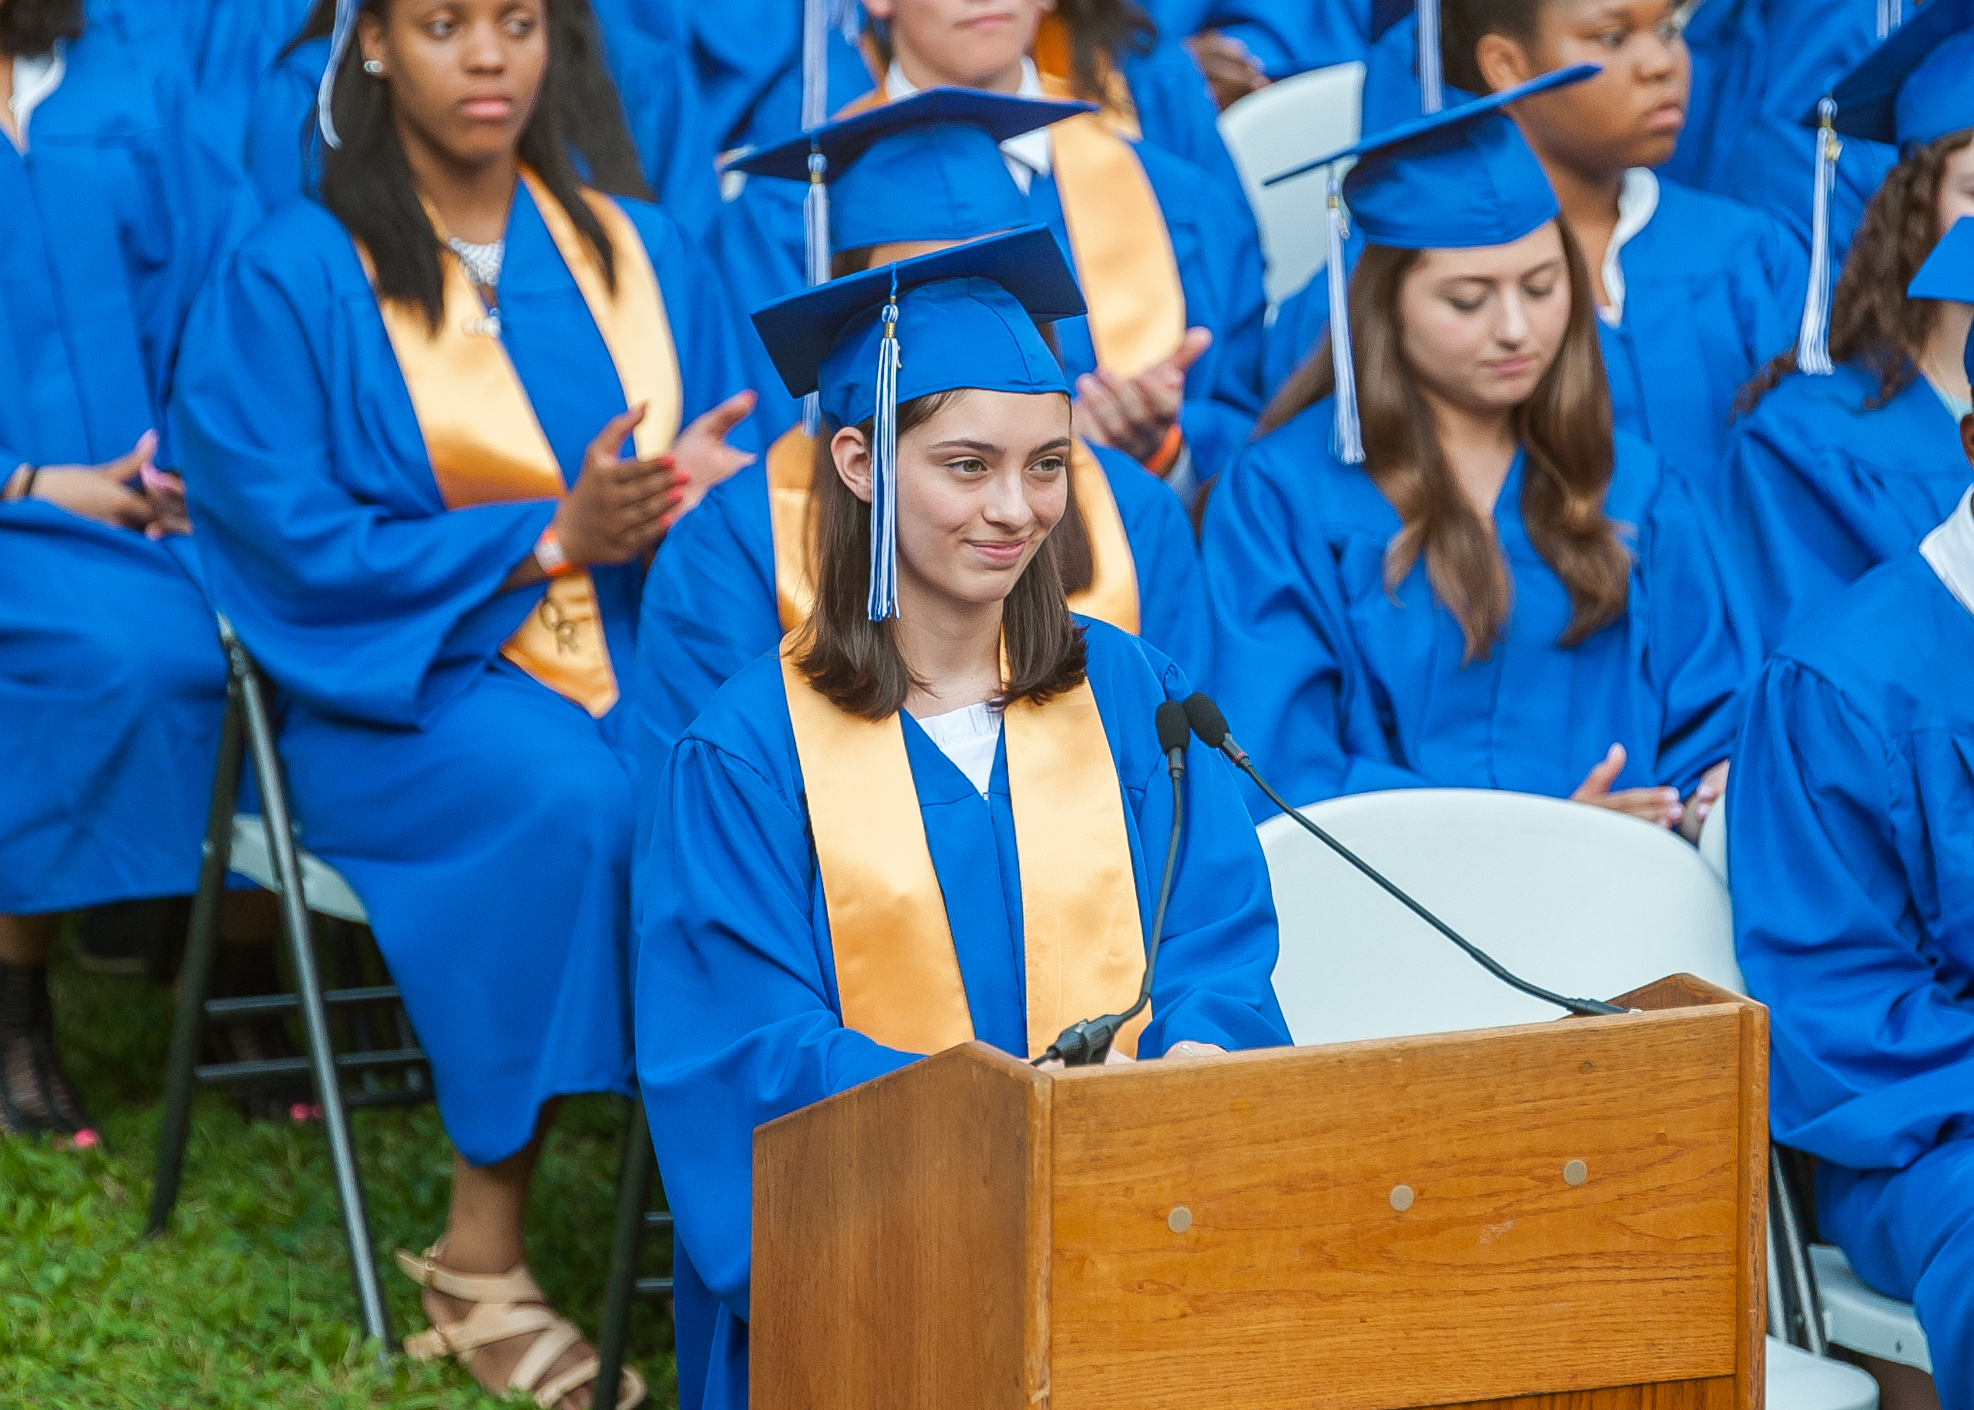 Class President Cristi Kennedy giving her speech. Photo by Scott Kennedy for The Montclair Dispatch.